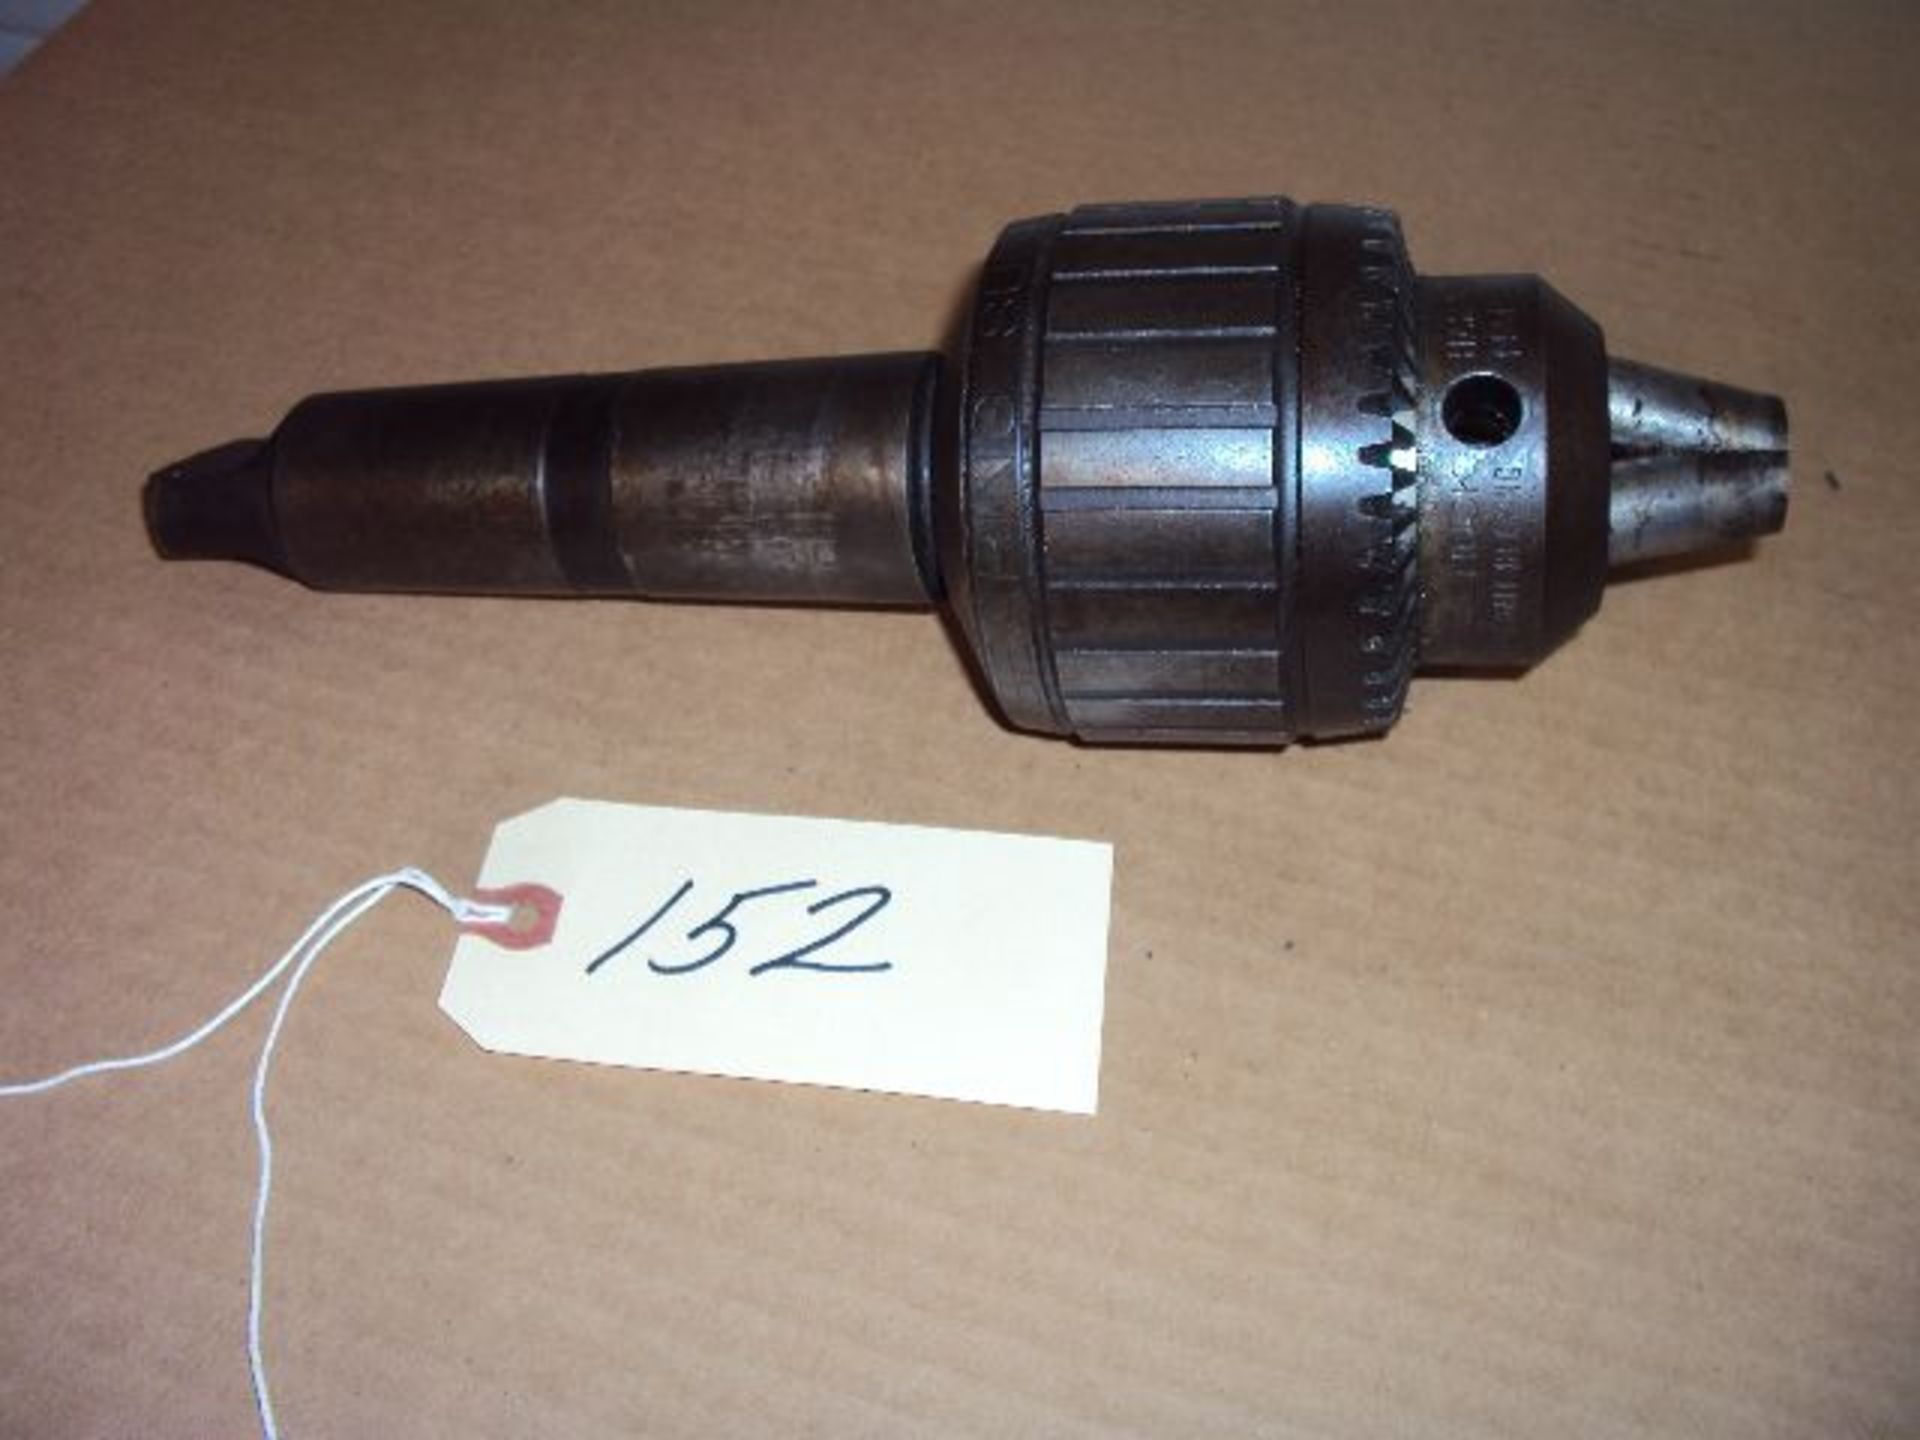 Jacobs No. 20N Super Ball Bearing Drill Chuck with Jacobs MT5 Shank